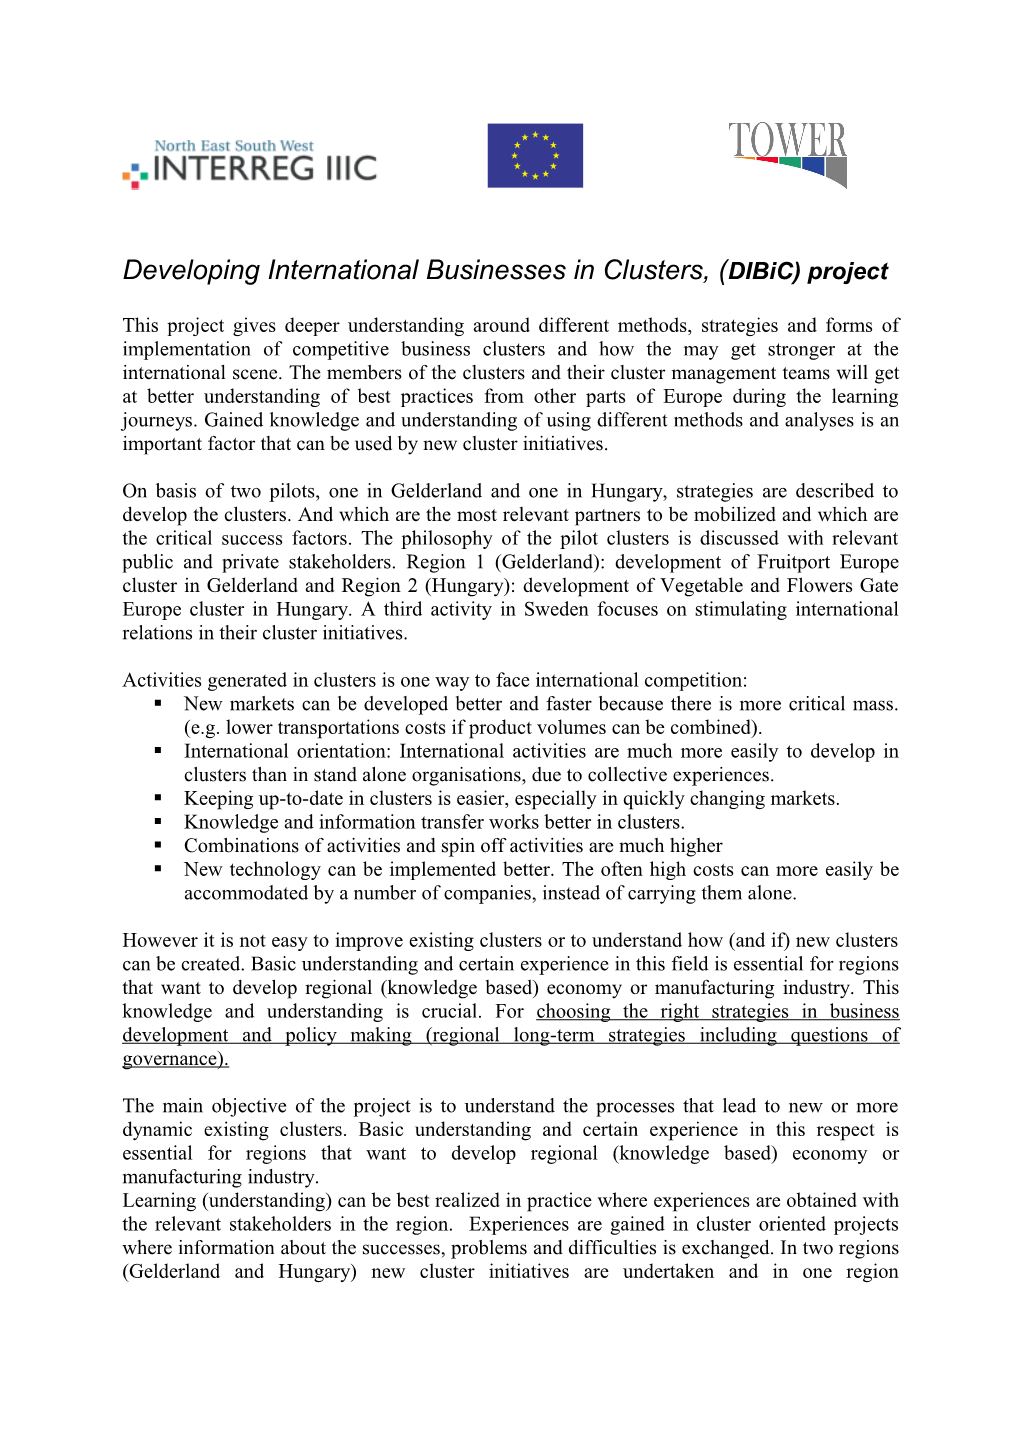 Developing International Businesses in Clusters, (Dibic) Project